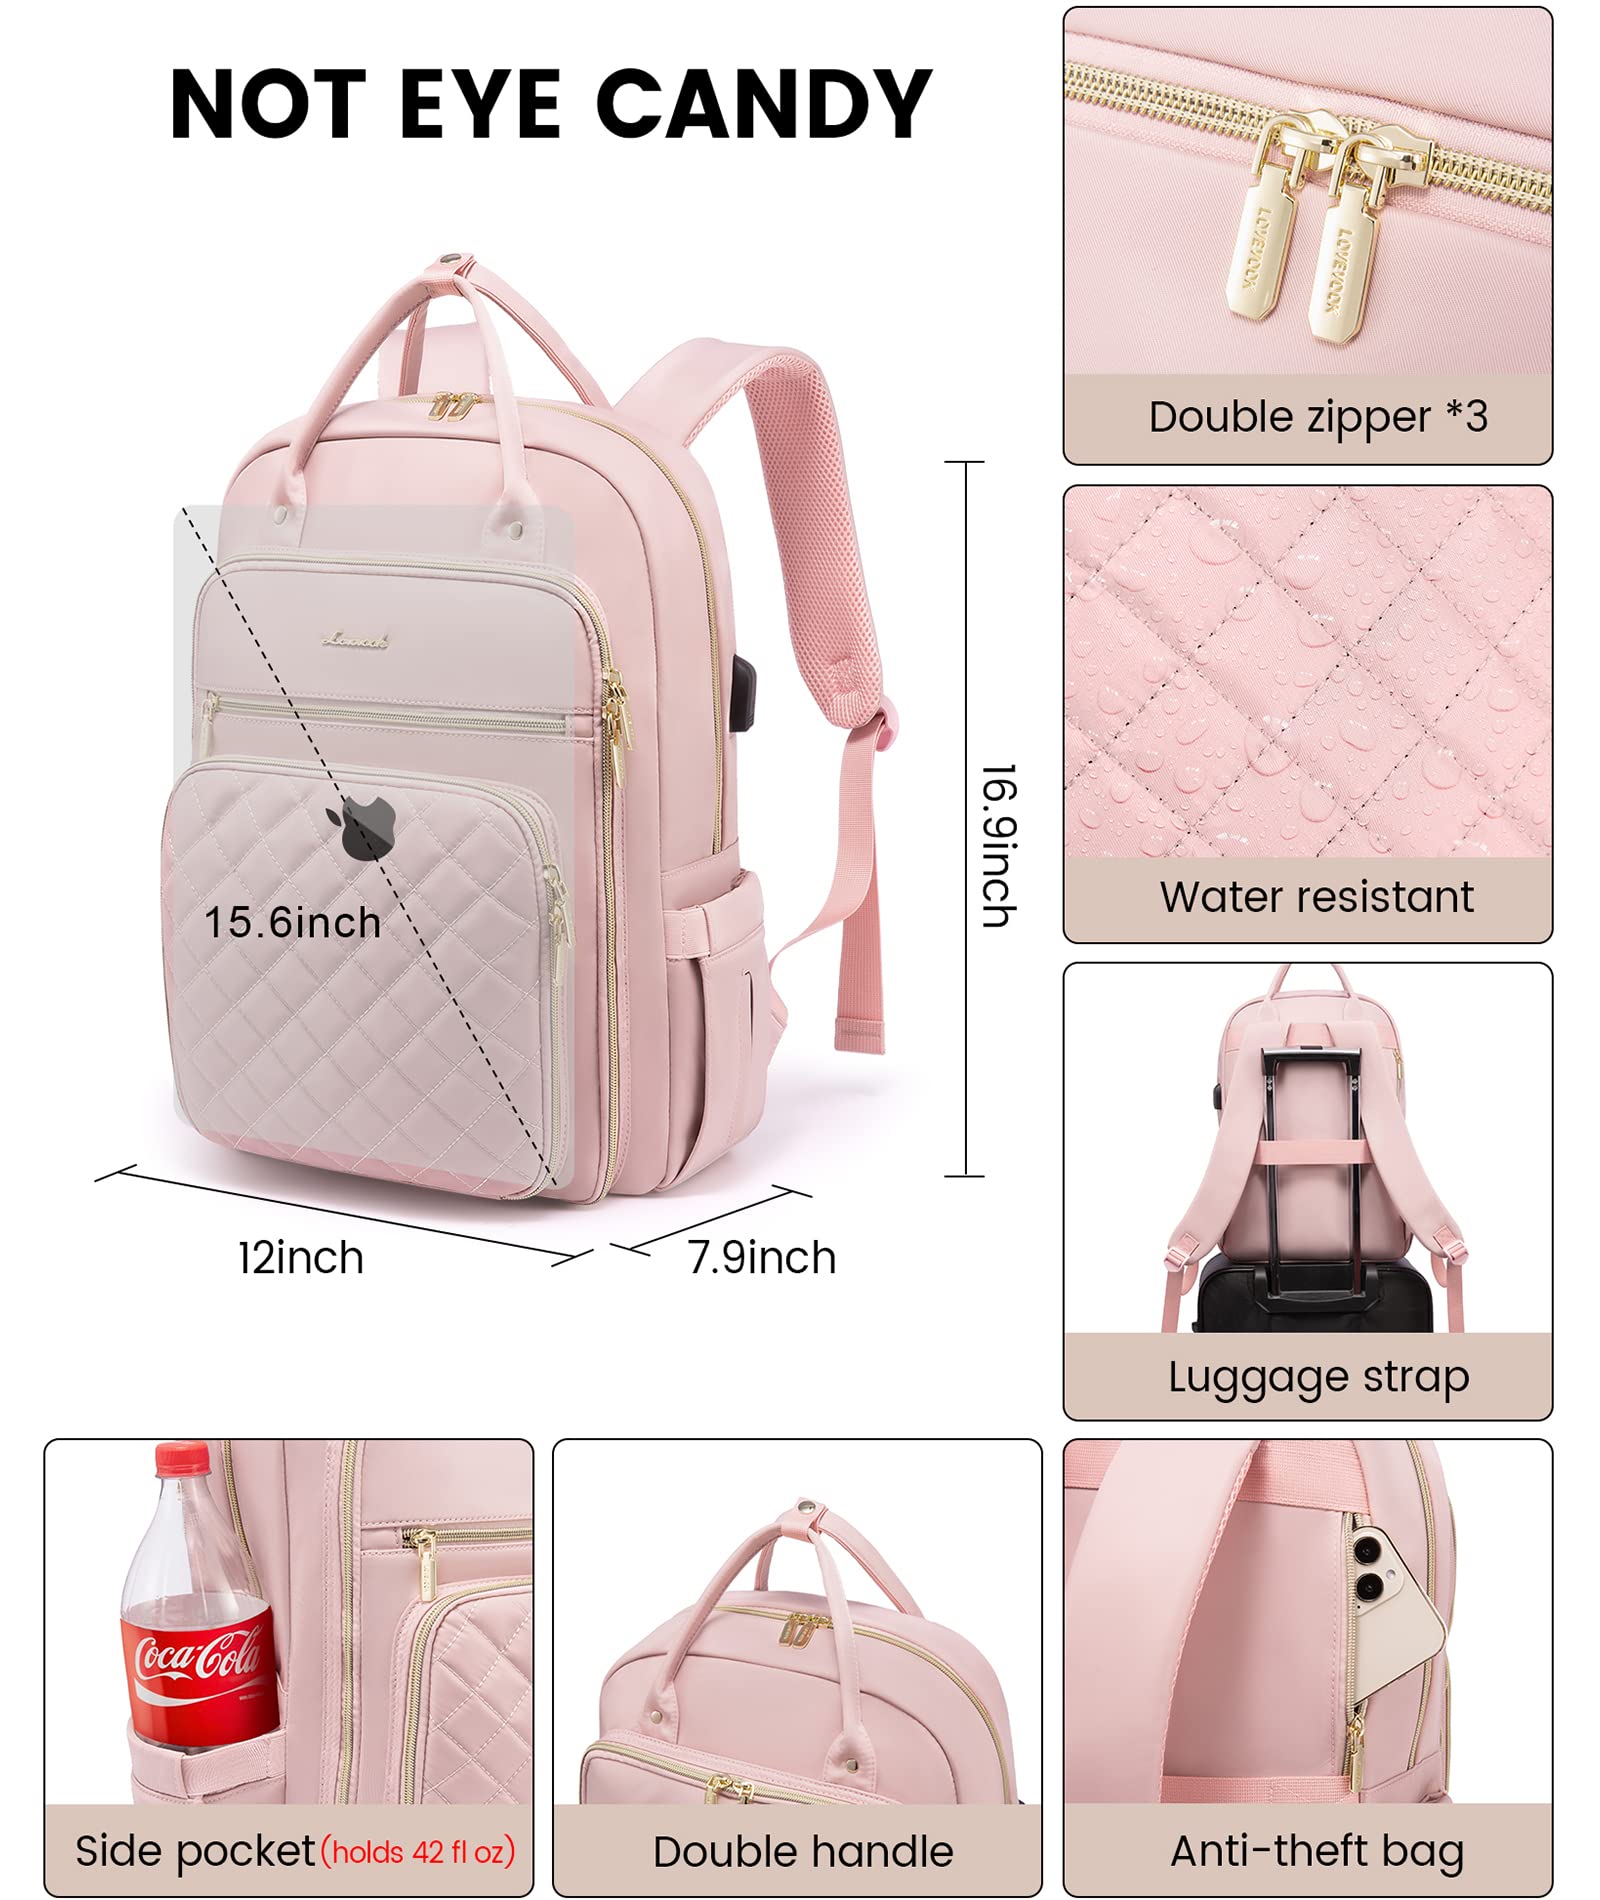 LOVEVOOK Laptop Backpack for Women, 15.6 Inch Computer Backpack for Teacher Nurse with Water Resistant, Lightweight Travel Work Backpack with USB Charging Port, Quilted Commuter Backpack purse, Pink